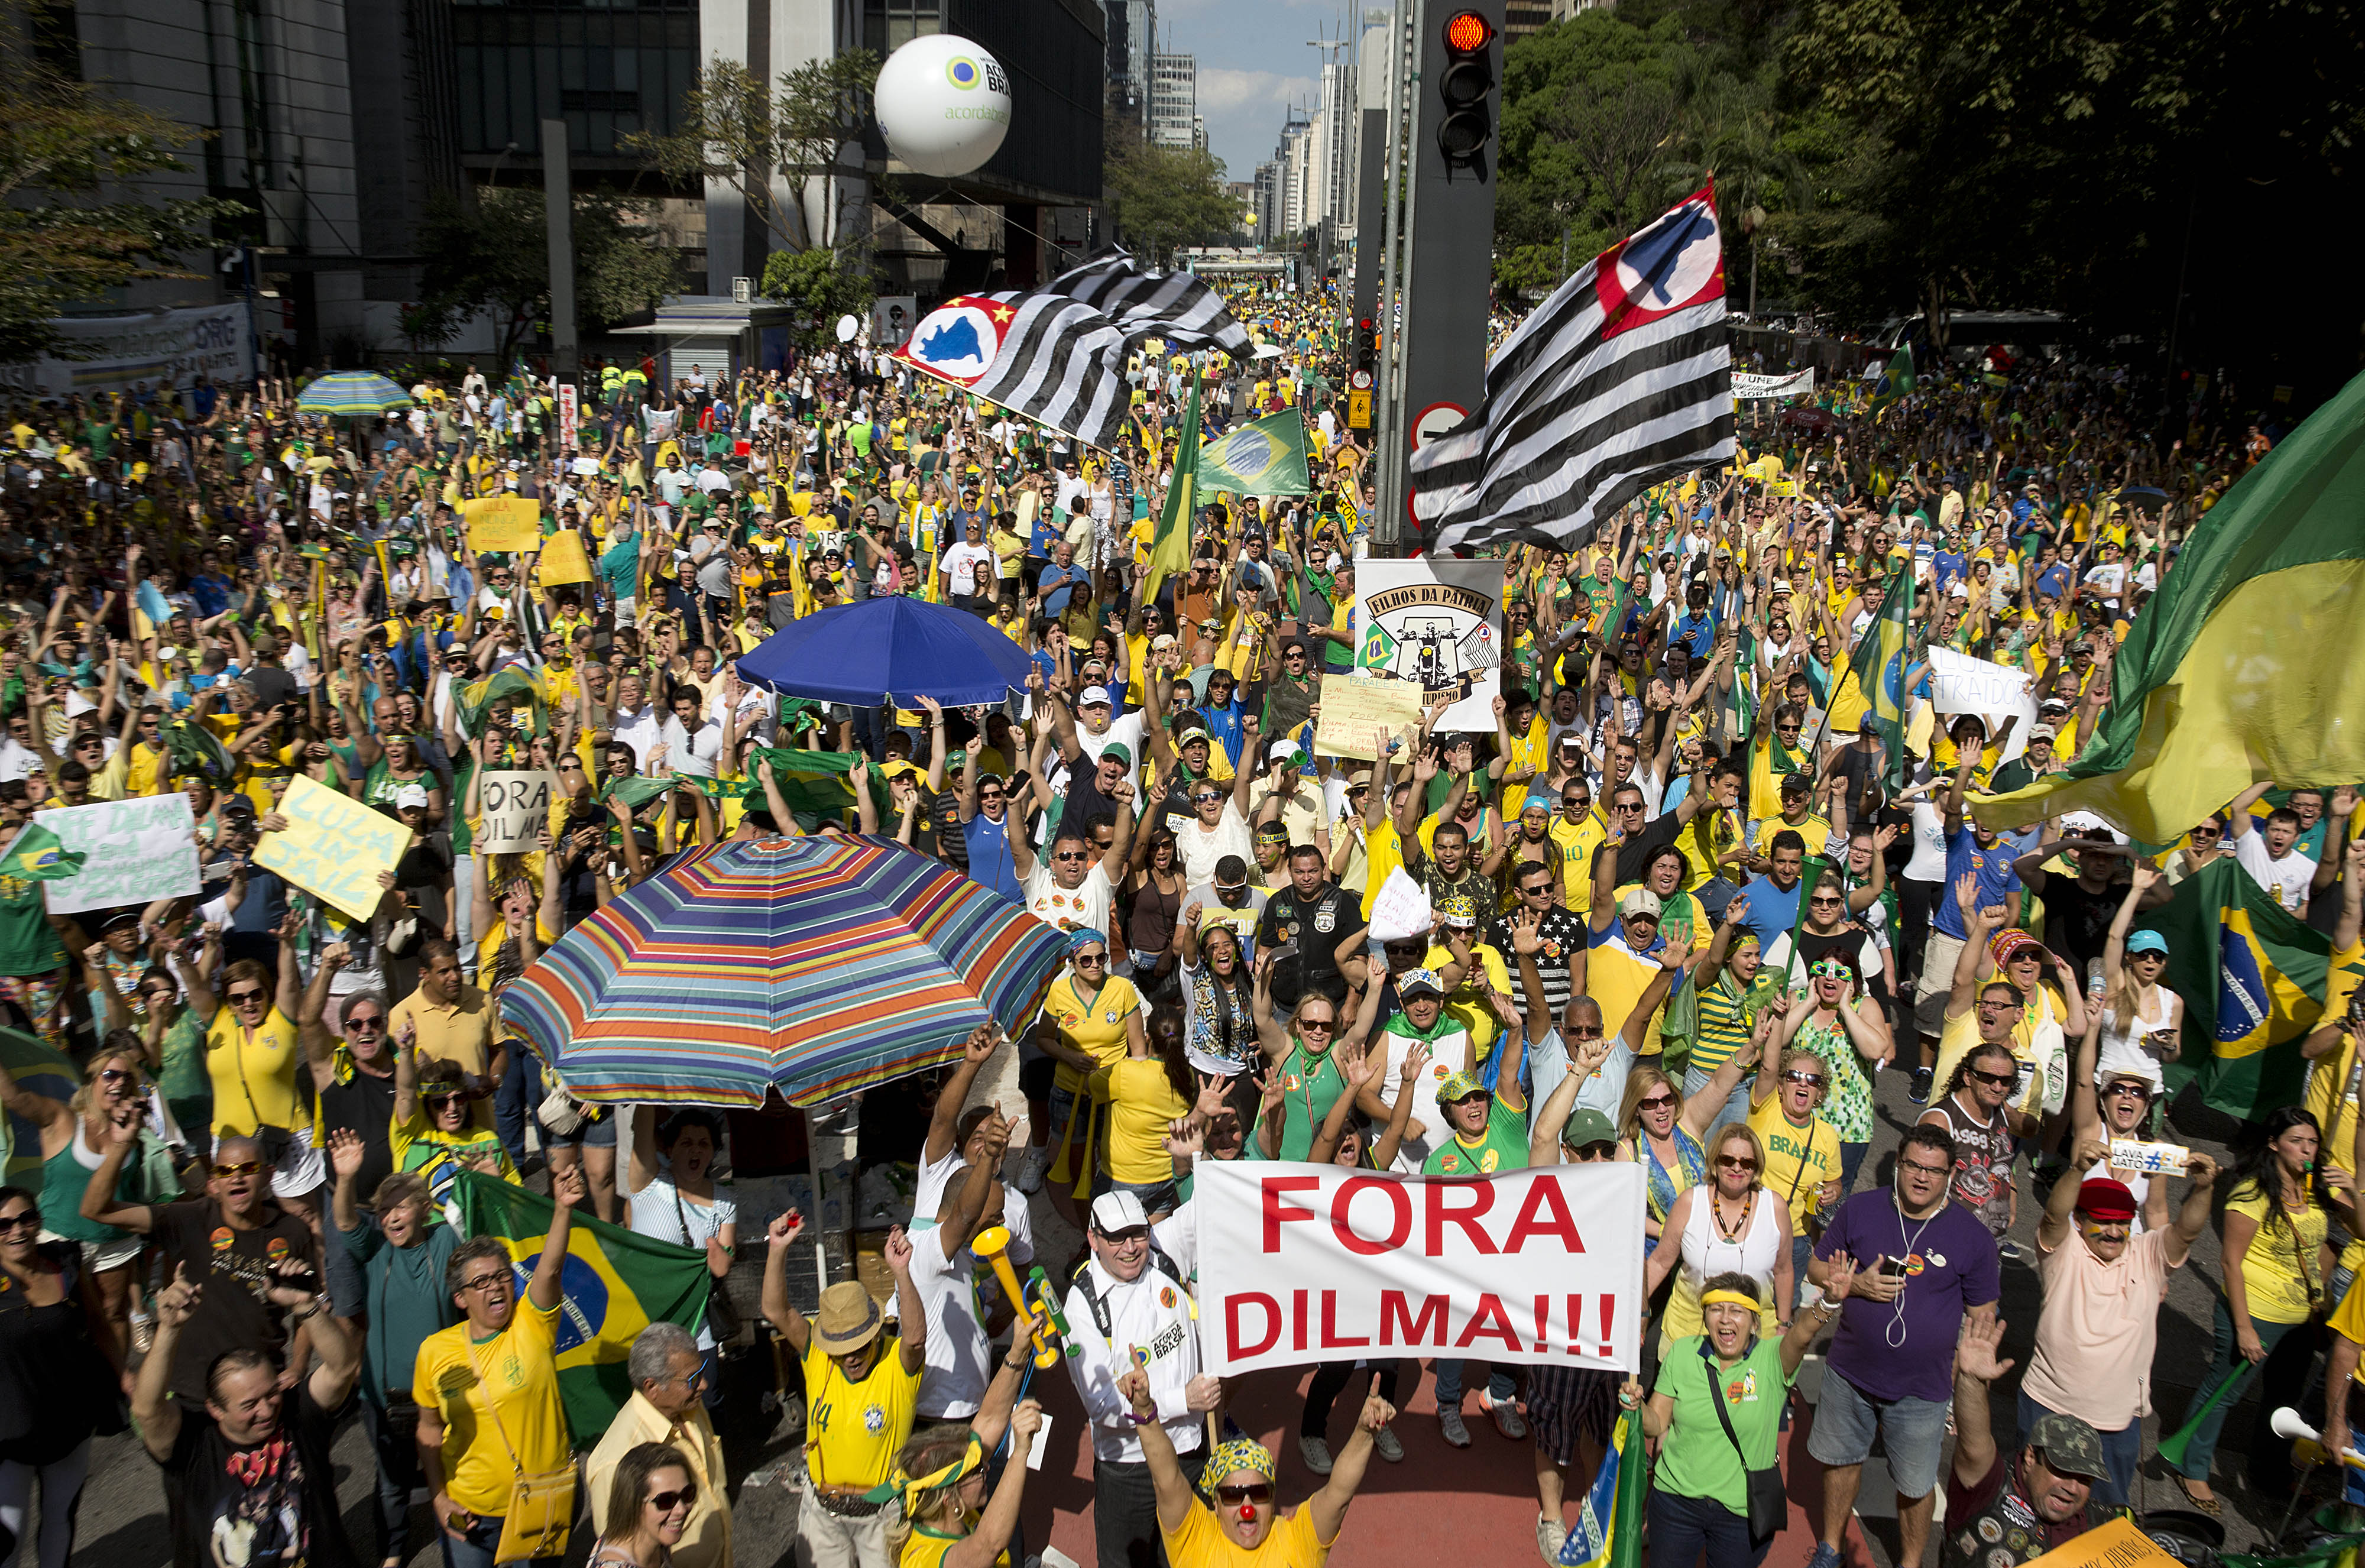 Demonstrators hold a sign that reads in Portuguese "Dilma out" during a protest demanding the impeachment of Brazil's President Dilma Rousseff in Sao Paulo, Brazil, Aug. 16, 2015 (Andre Penner—AP)